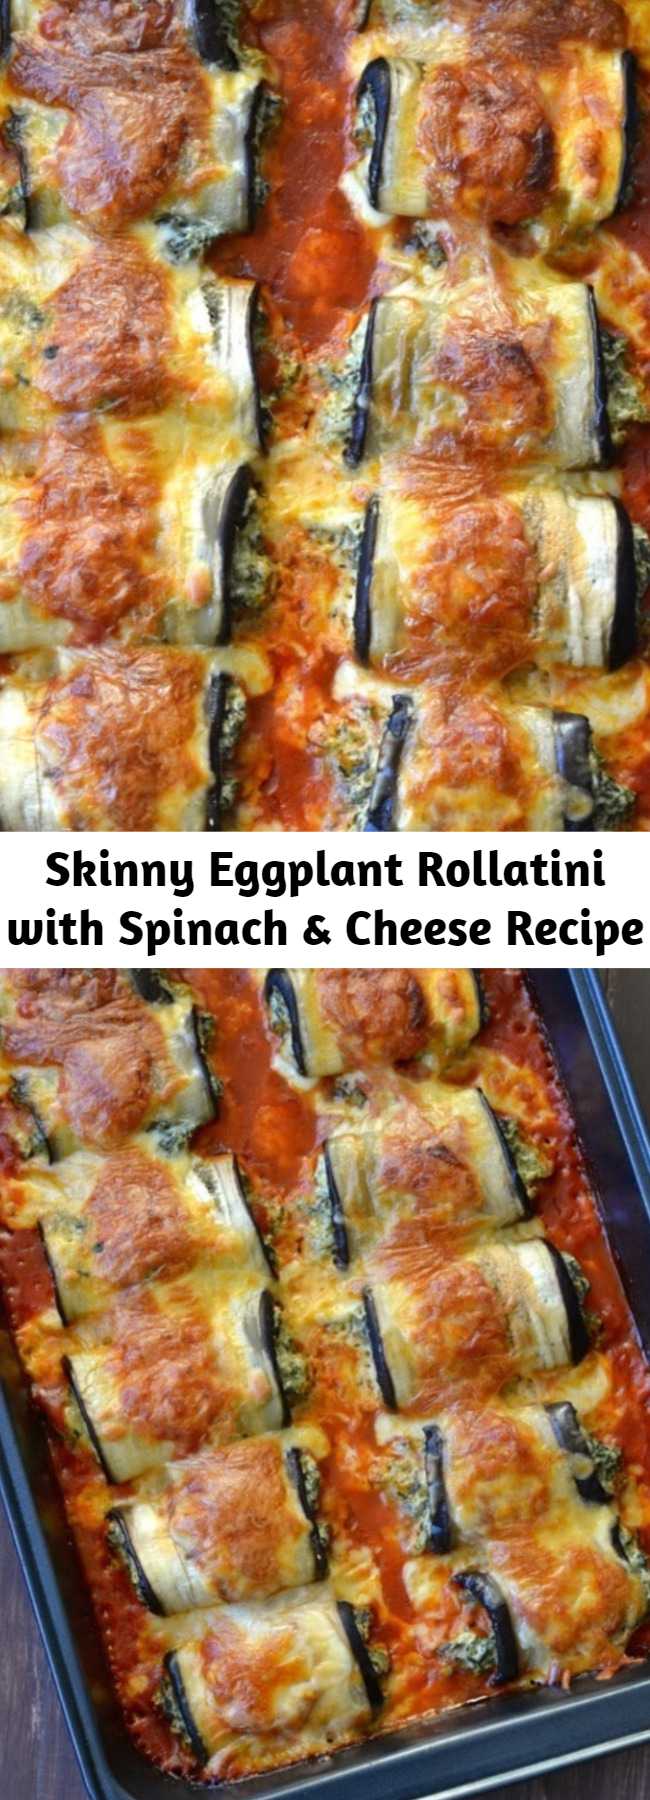 Skinny Eggplant Rollatini with Spinach & Cheese Recipe - Sliced eggplants stuffed with Italian cheese and spinach, then rolled up and baked until tender with loads of melted cheese on top. These guilt-free Skinny Eggplant Rollatini are scrumptious, gluten free and low carb!